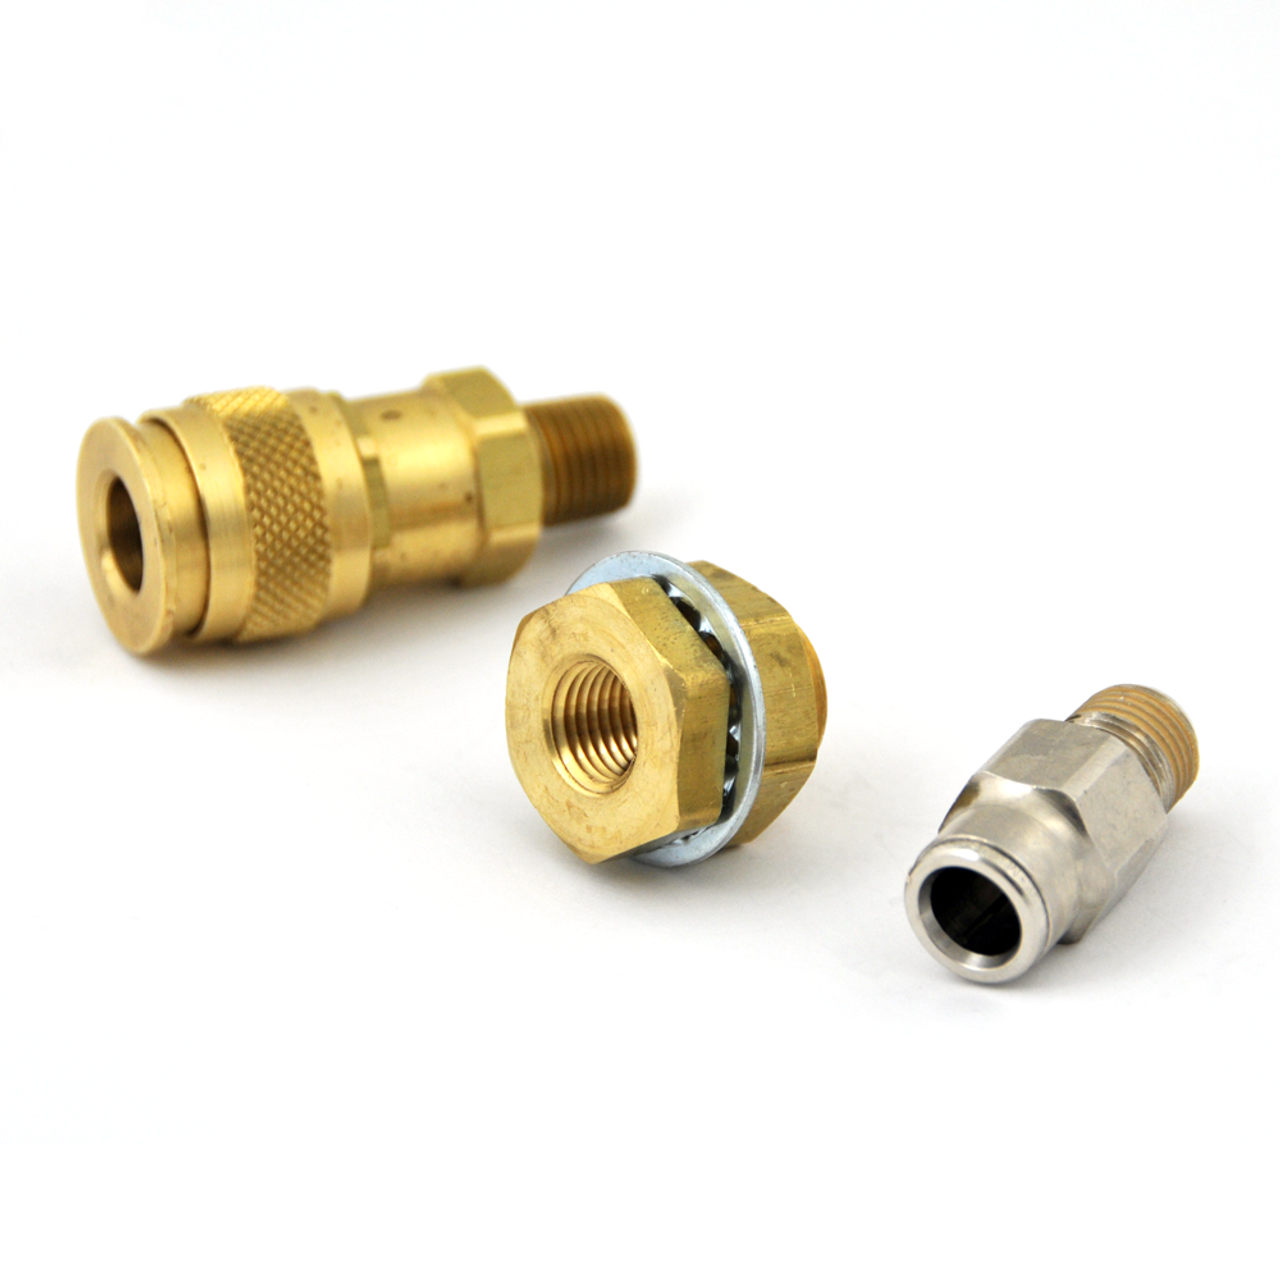 Air Quick Coupler Fitting Set (AQC-1) shown.